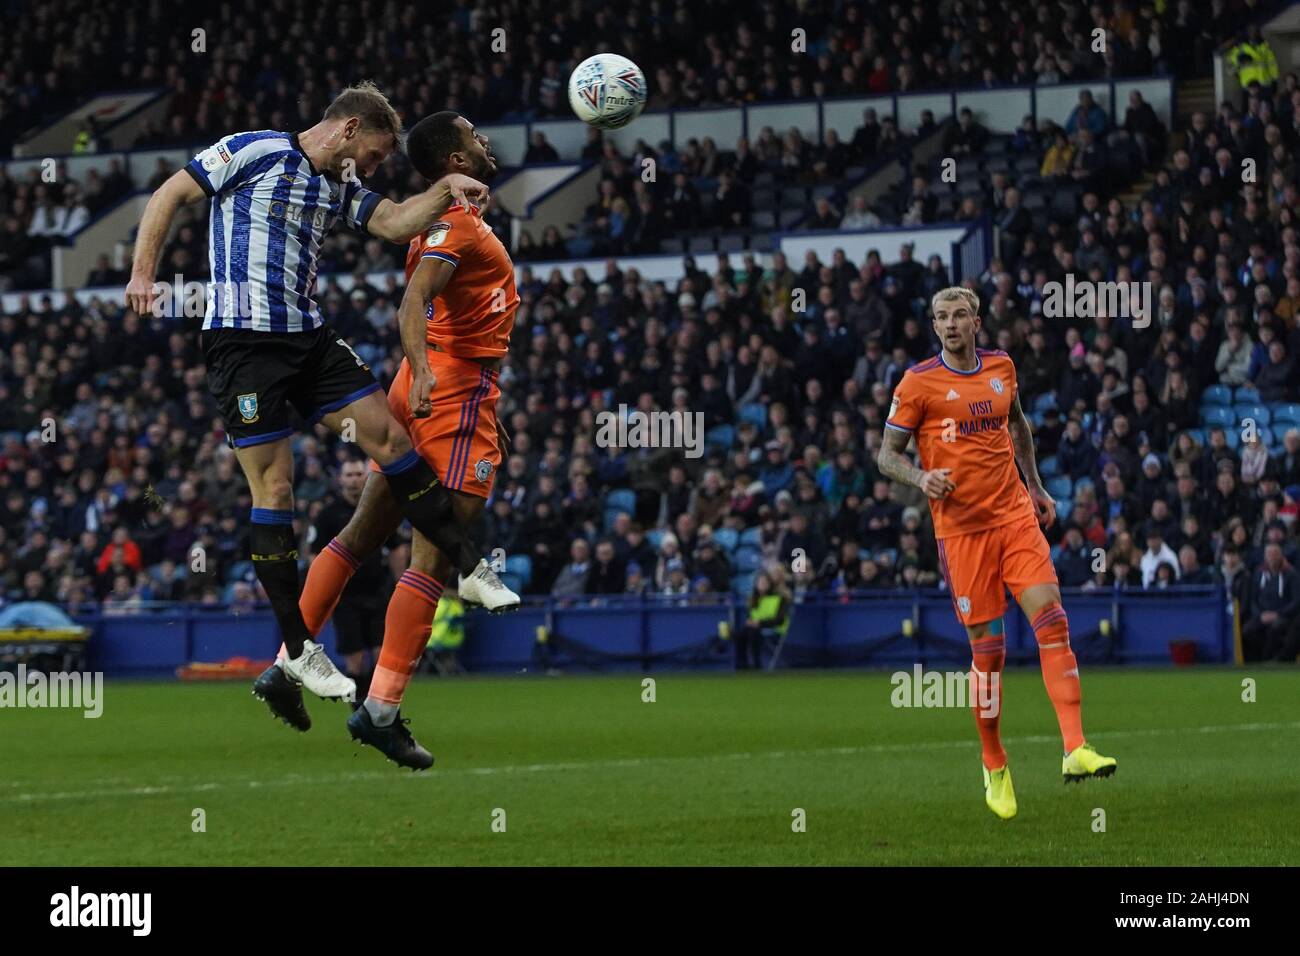 29th December 2019, Hillsborough, Sheffield, England; Sky Bet Championship, Sheffield Wednesday v Cardiff City : Tom Lees (15) of Sheffield Wednesday heads the ball into the back of the net to make it 2-1  Credit: Kurt Fairhurst/News Images Stock Photo